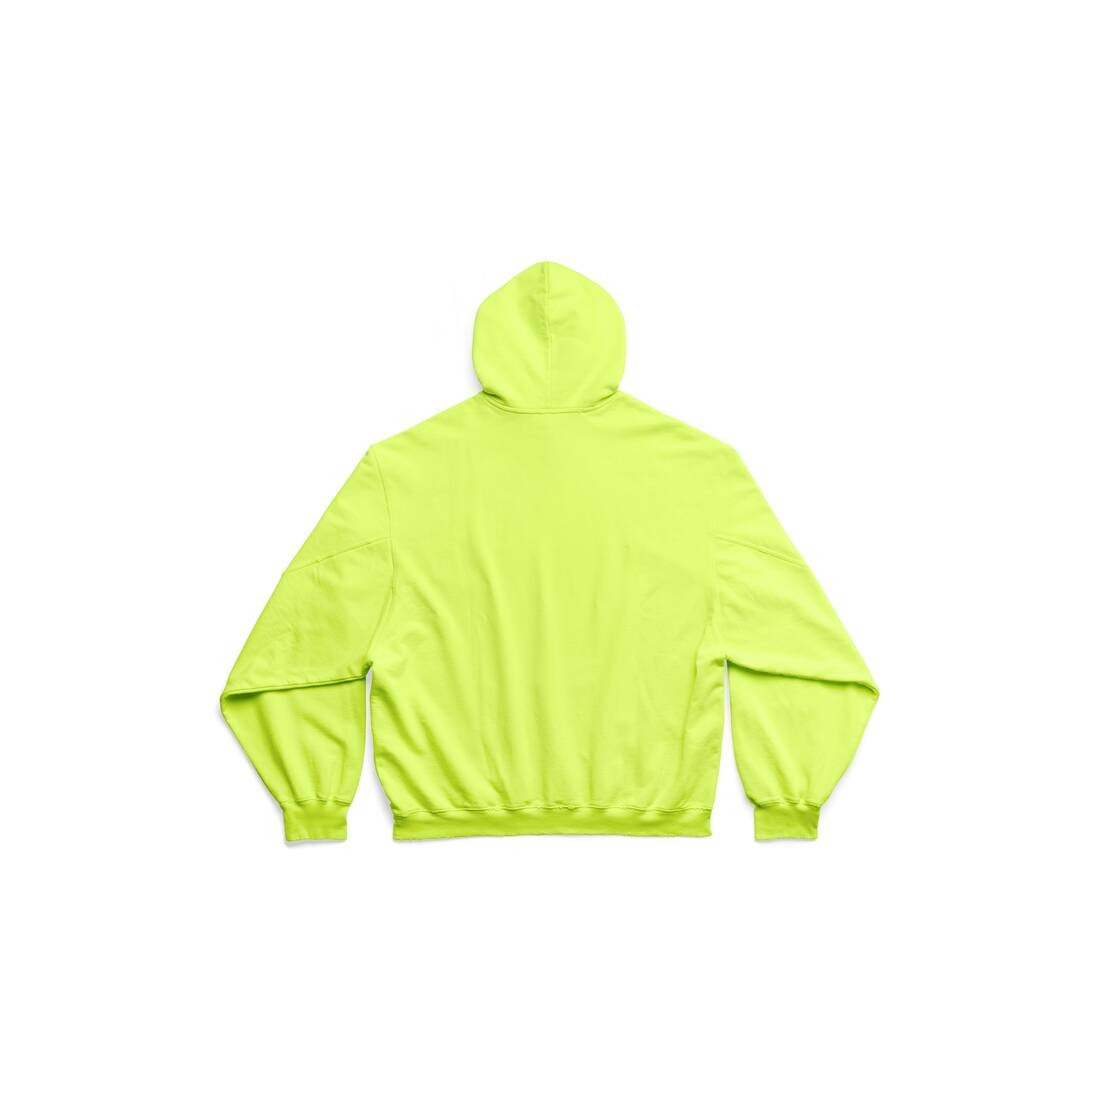 Caps Destroyed Hoodie in Fluo Yellow